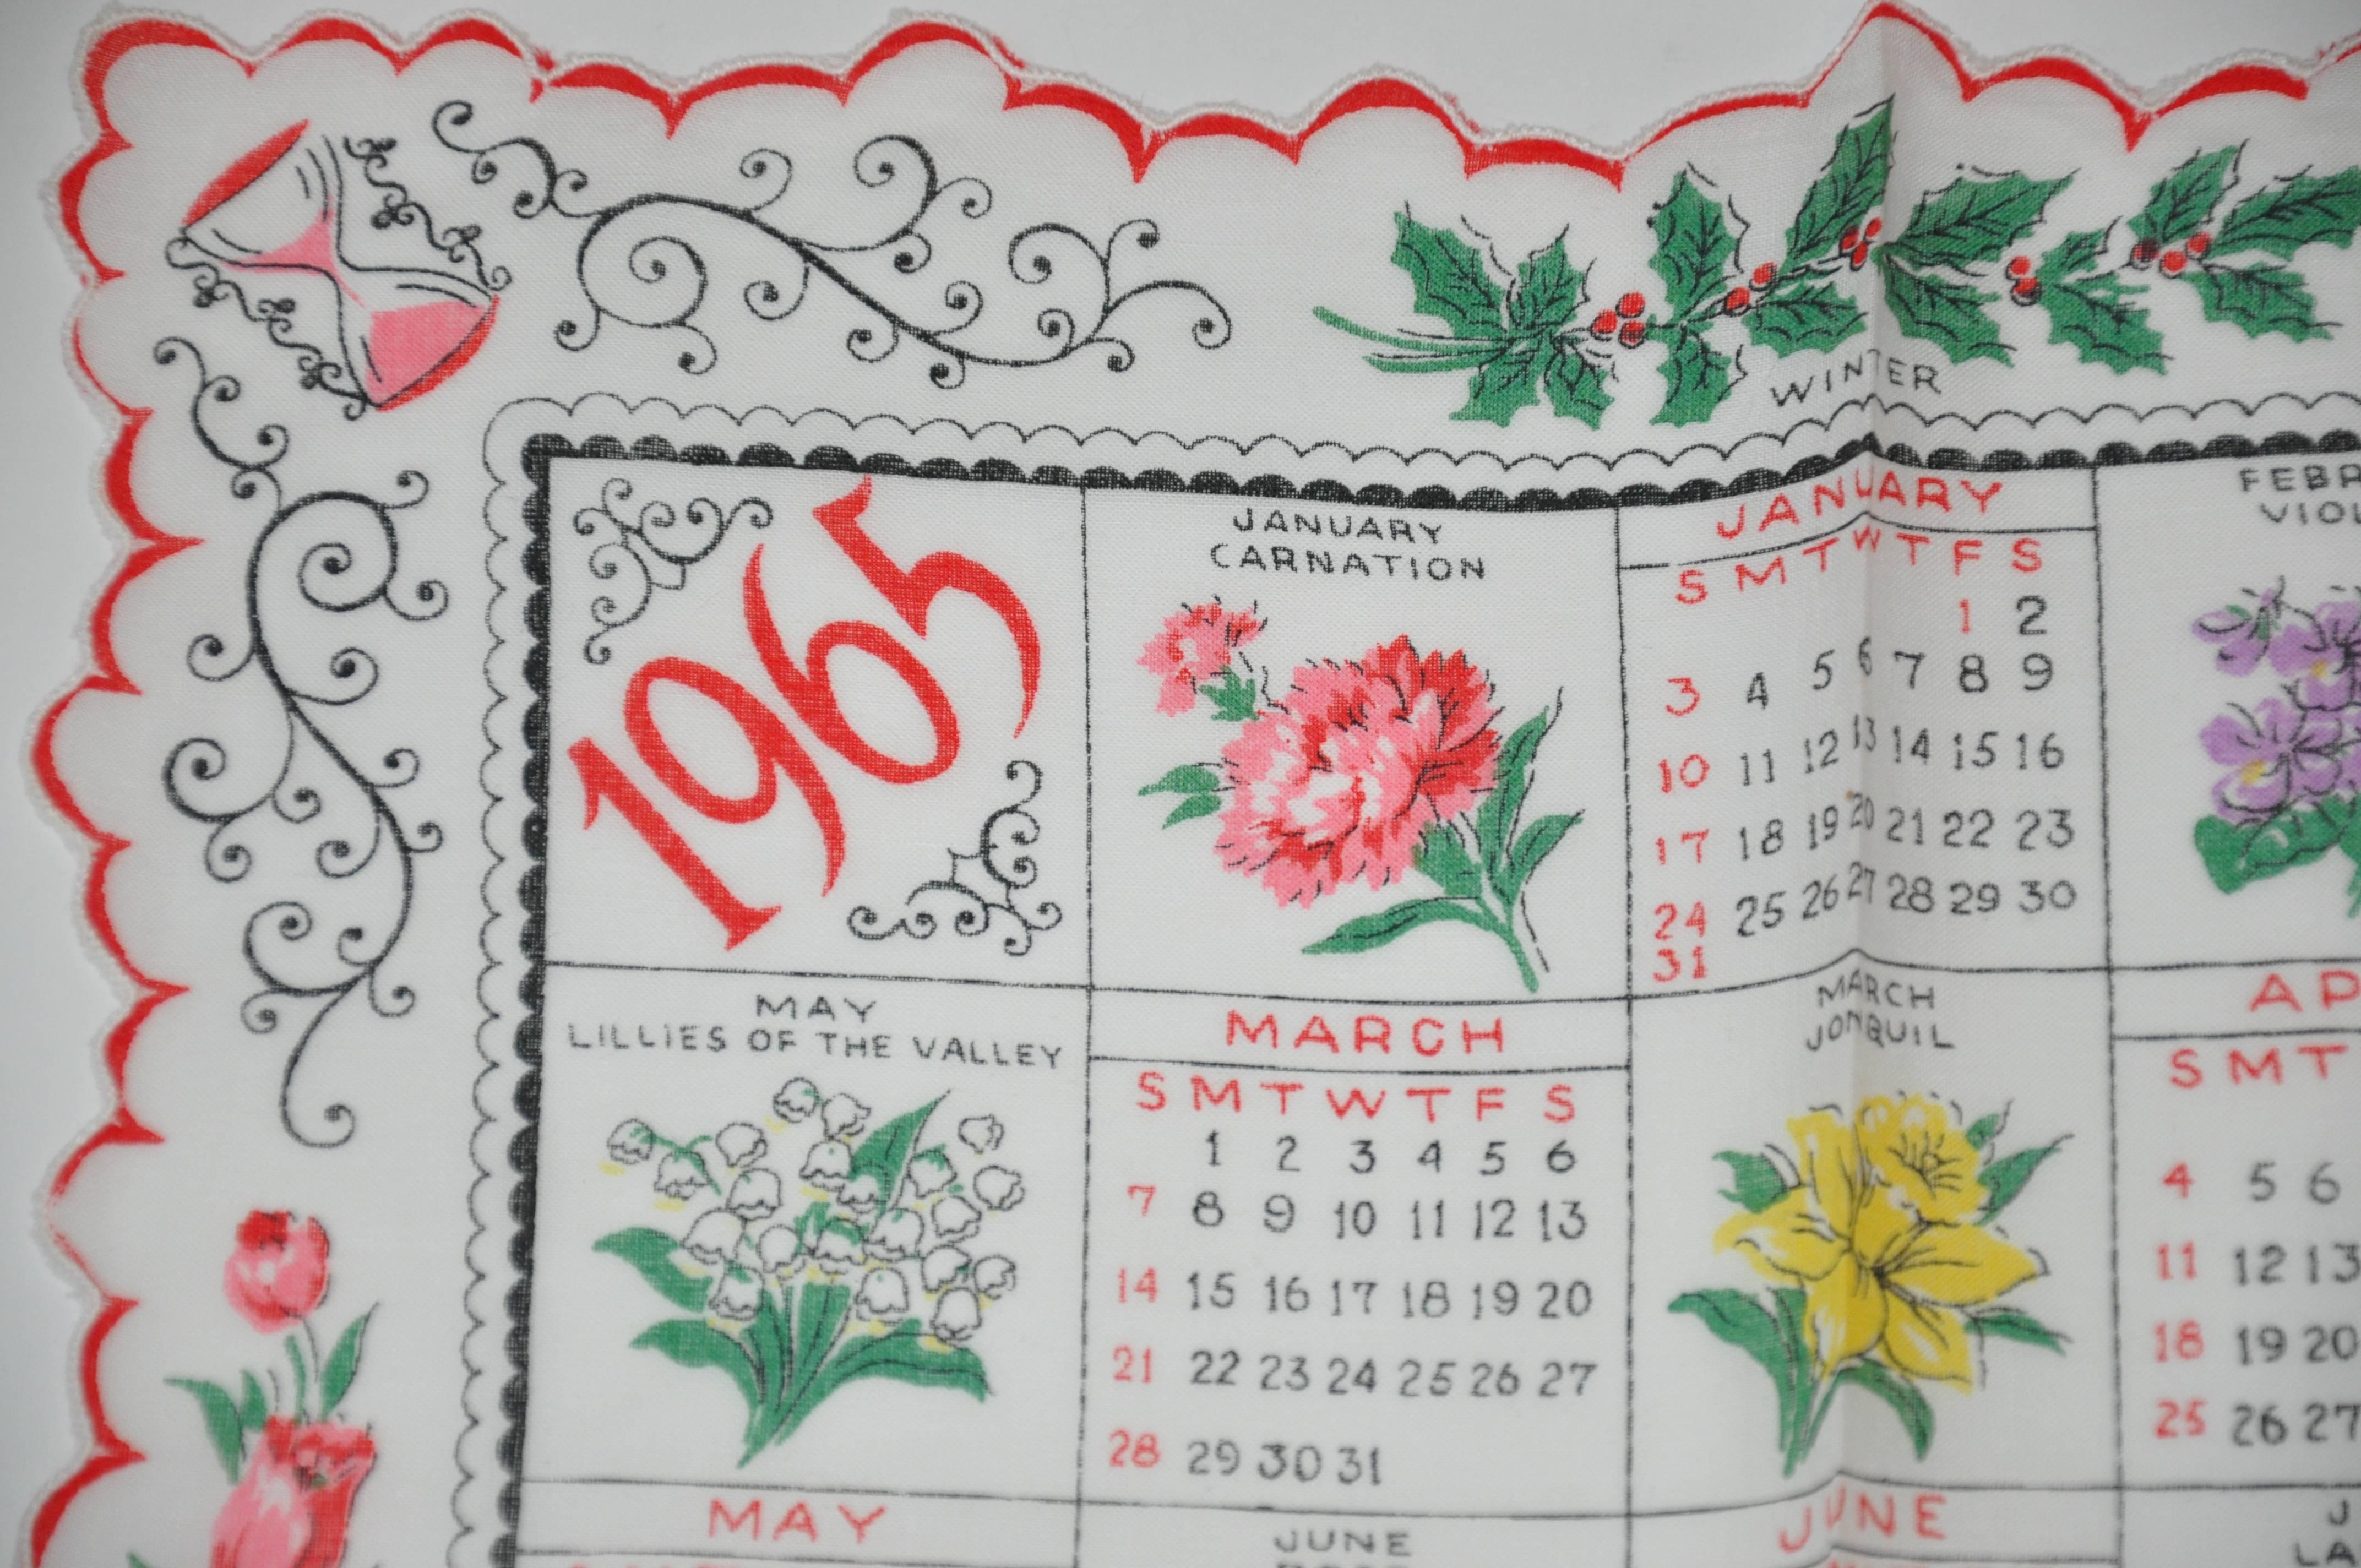 "1965" calendar cotton handkerchief measures 14" x 14" and wonderfully finished with red & white scallop edges. Made in USA.